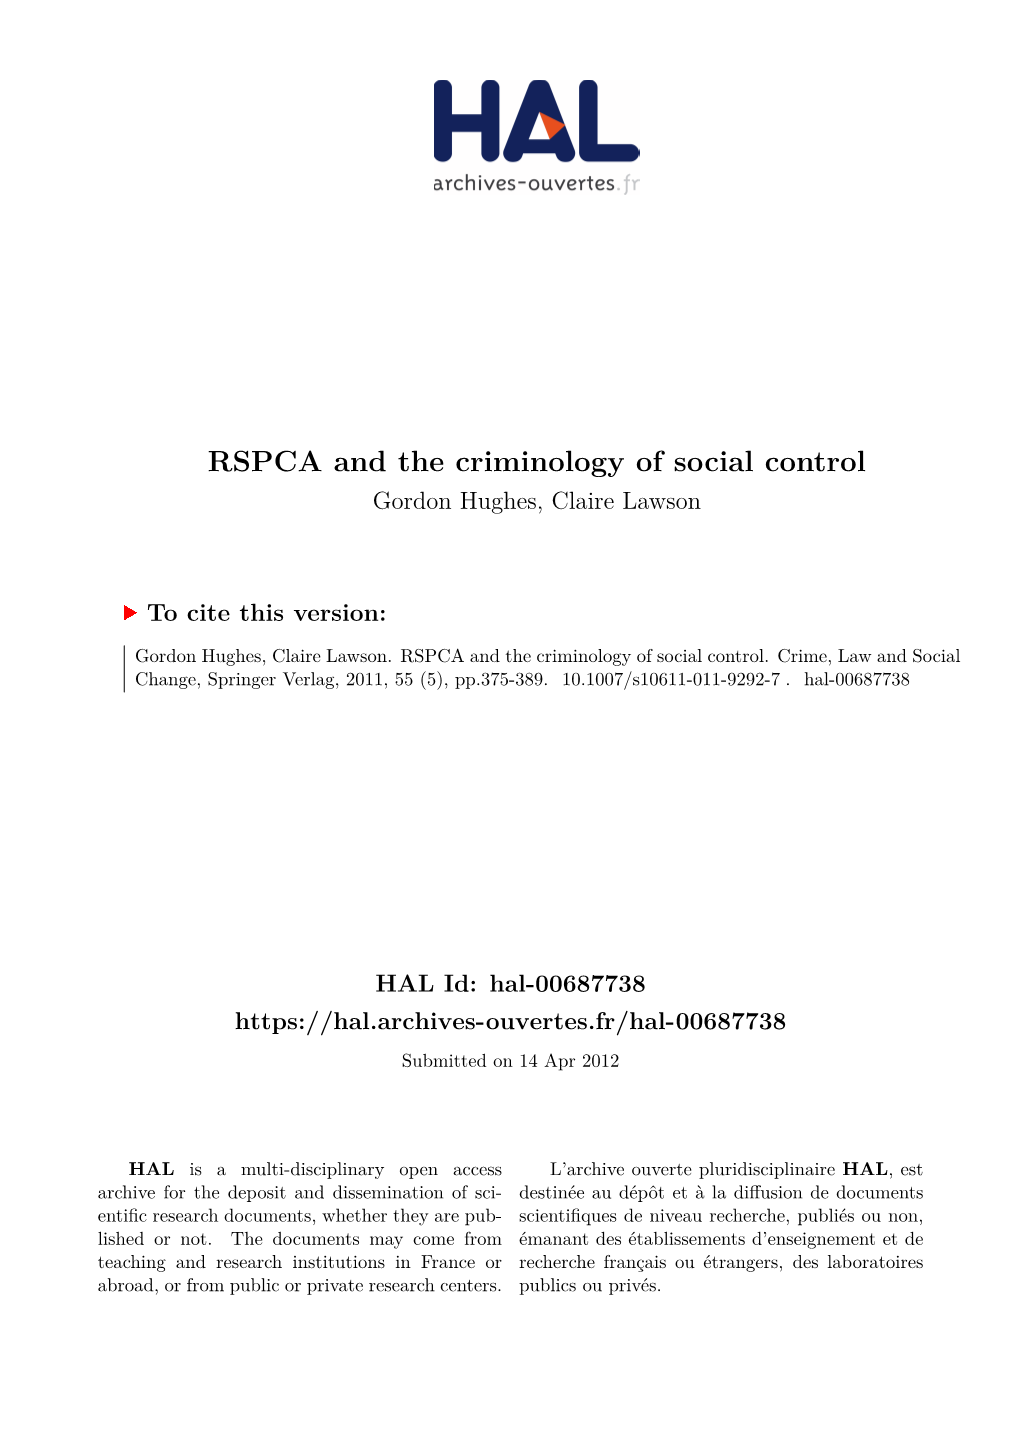 RSPCA and the Criminology of Social Control Gordon Hughes, Claire Lawson